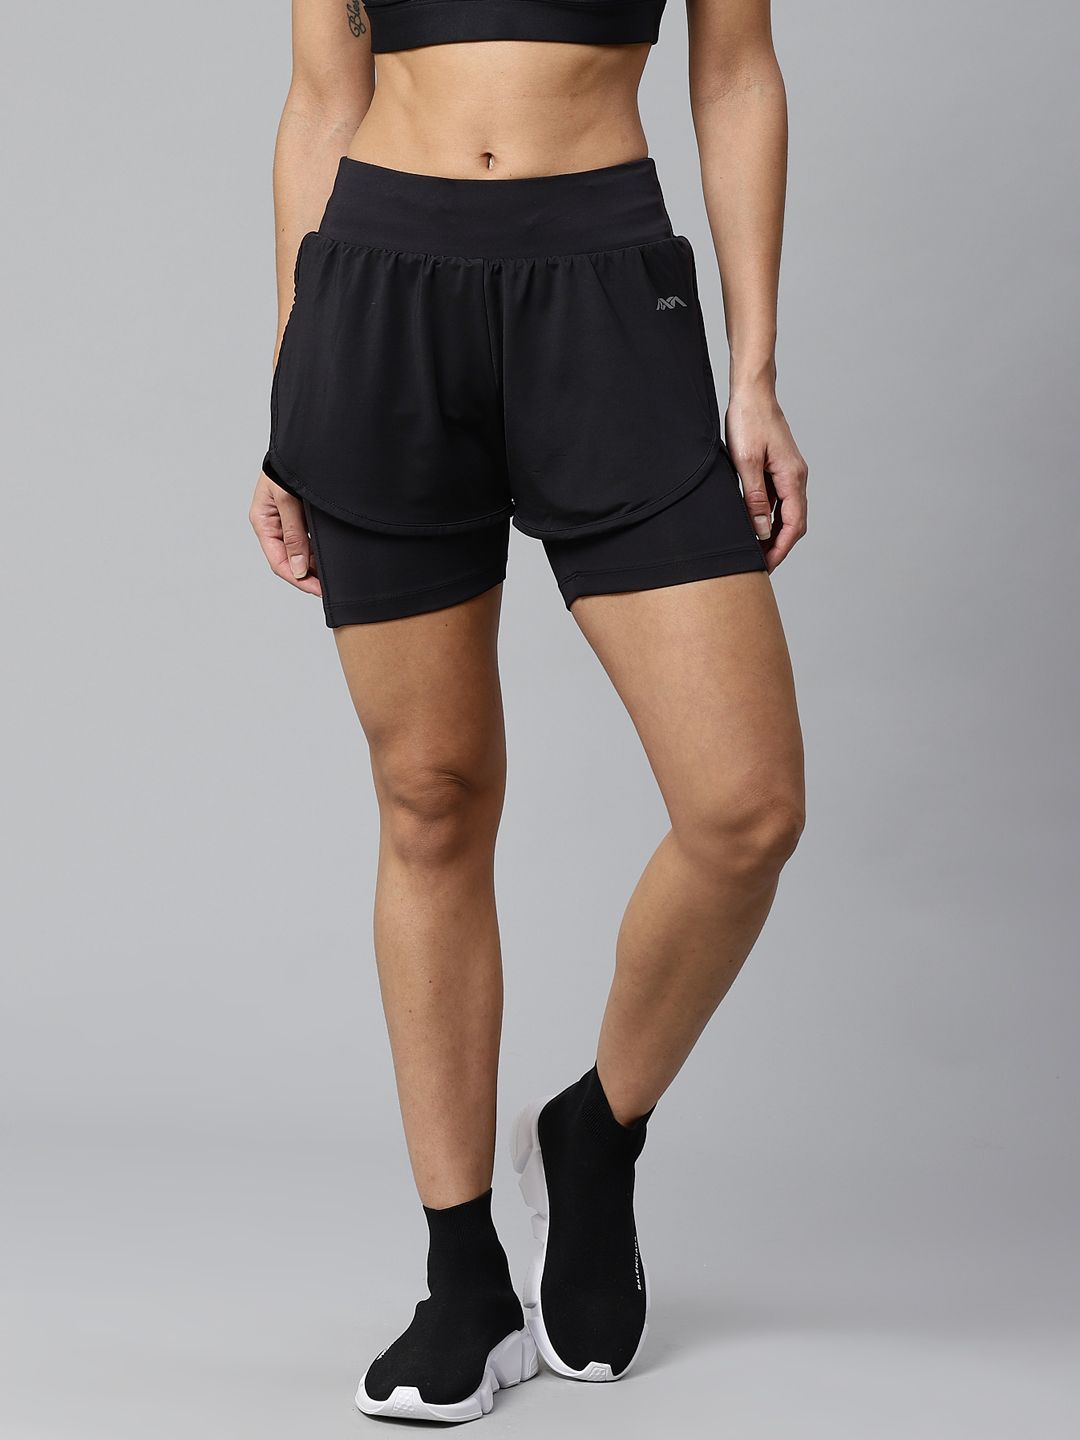 Alcis Women Black Solid Regular Fit Sports Shorts Price in India